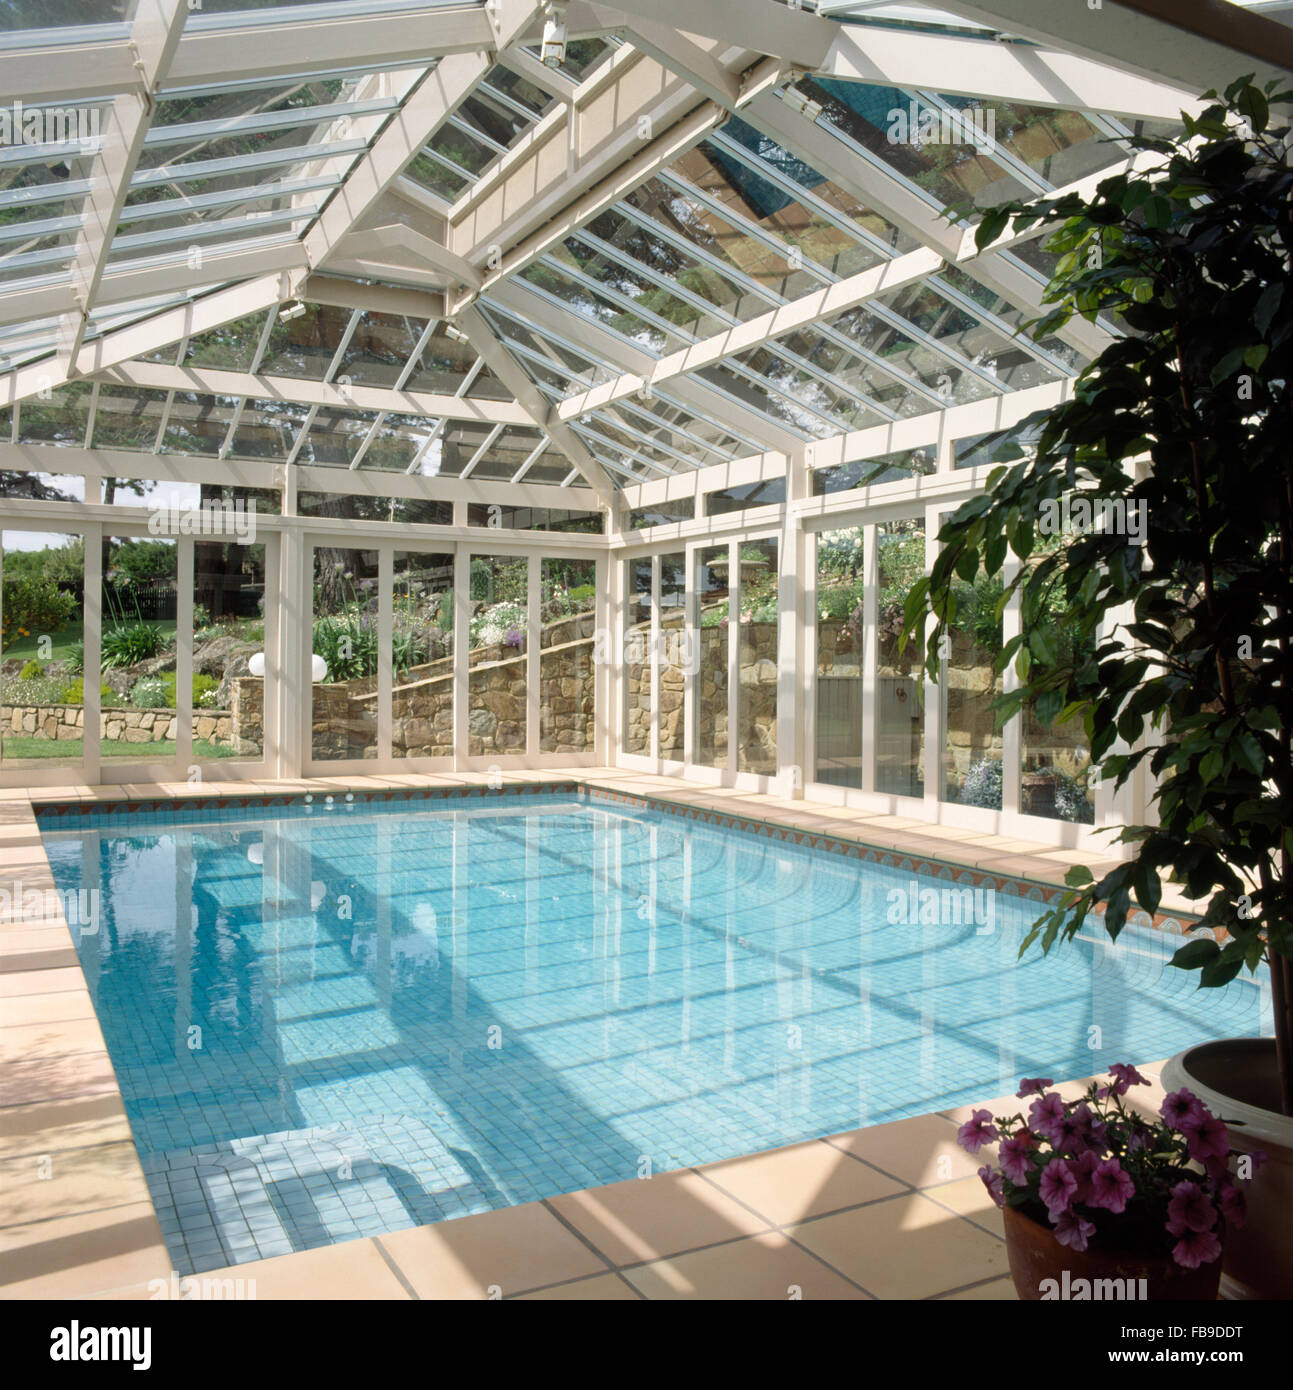 Turquoise indoor swimming pool in glass building Stock Photo